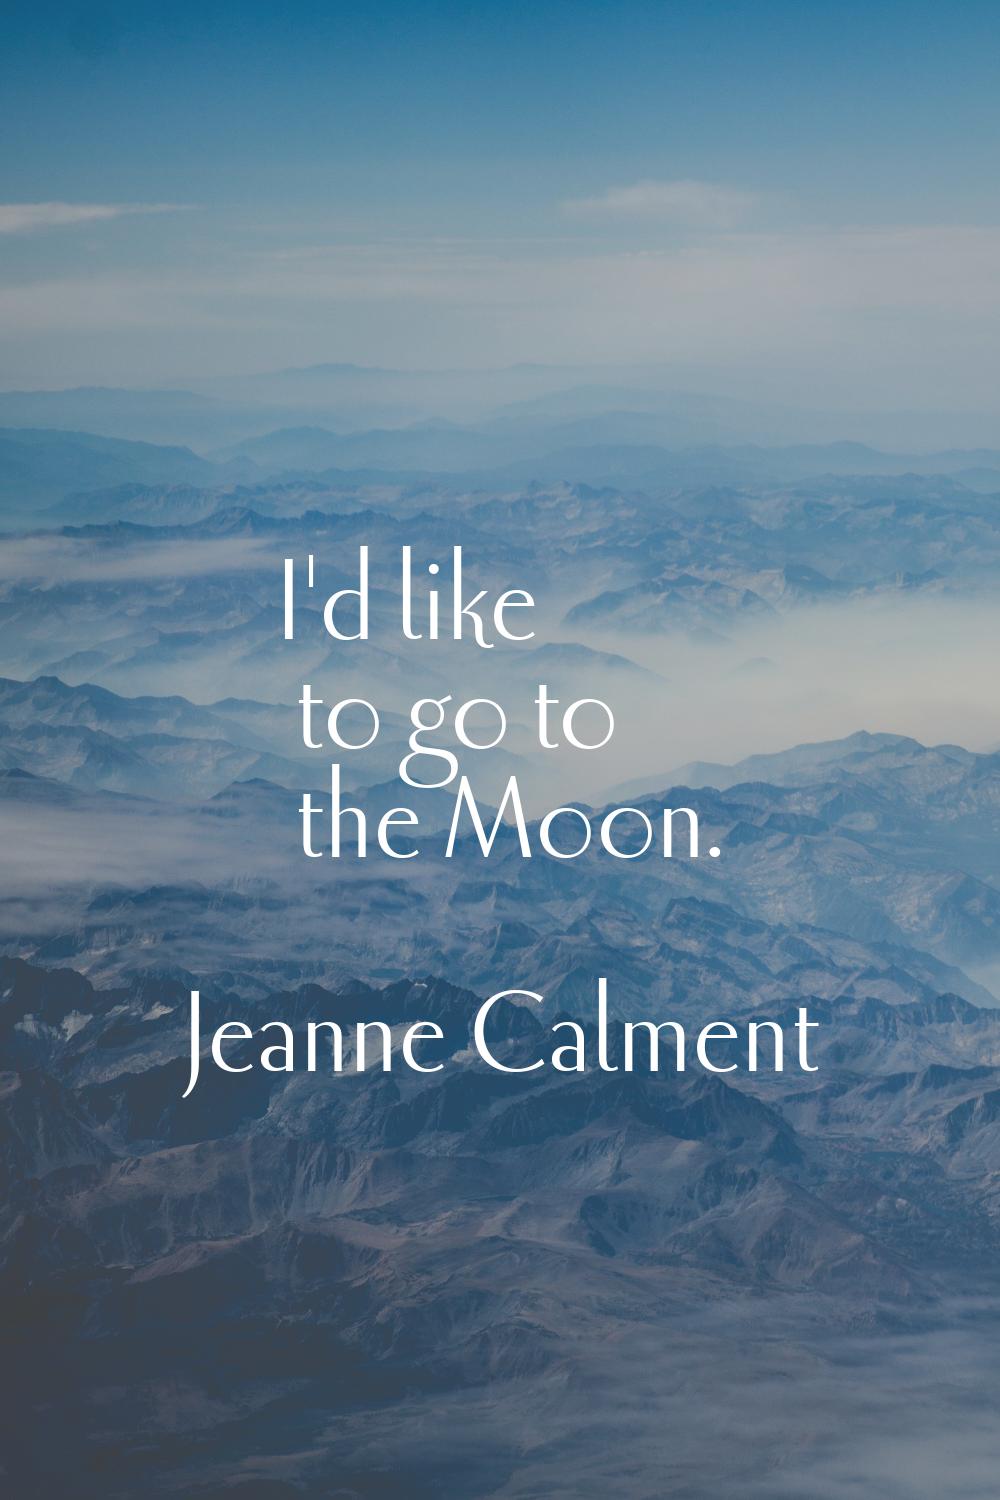 I'd like to go to the Moon.